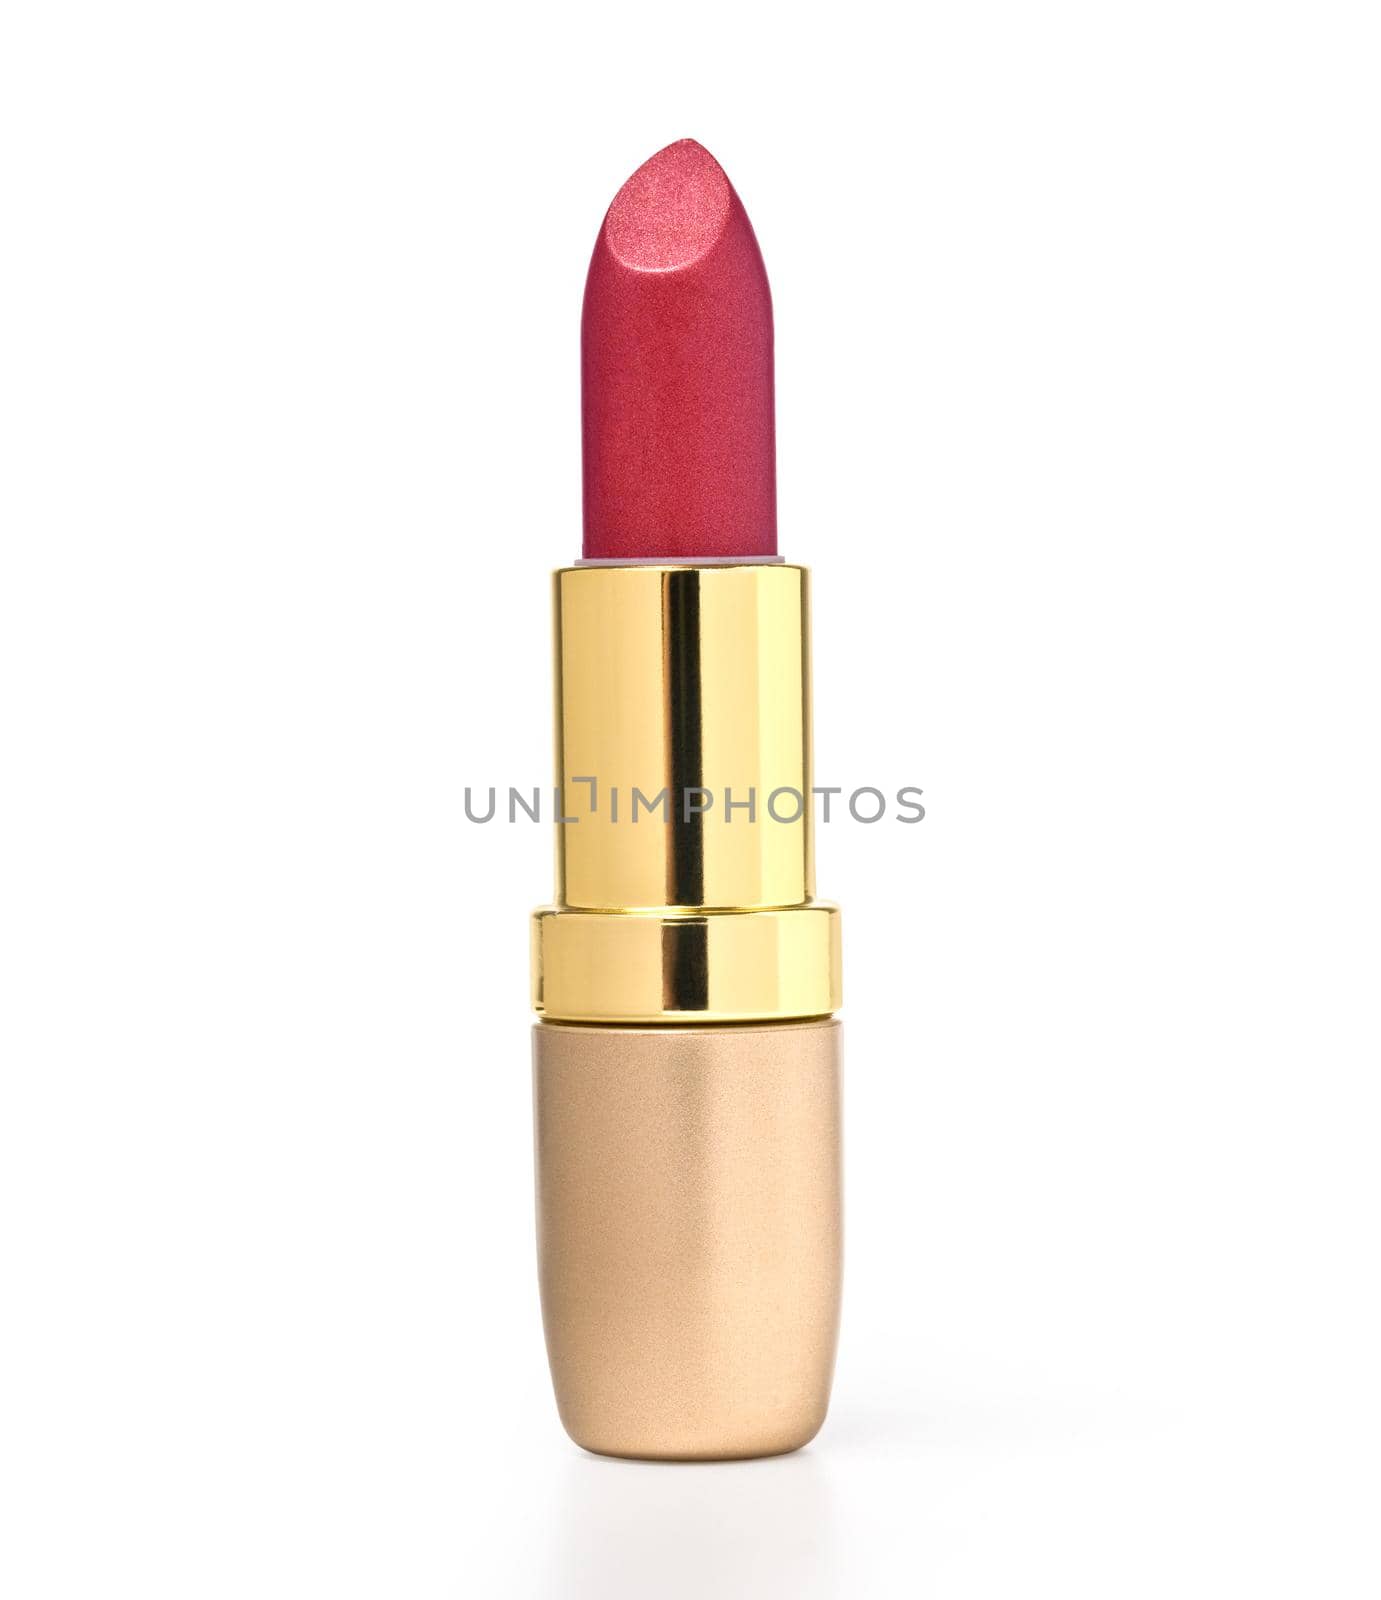 close up of a lipstick on white background with clipping path